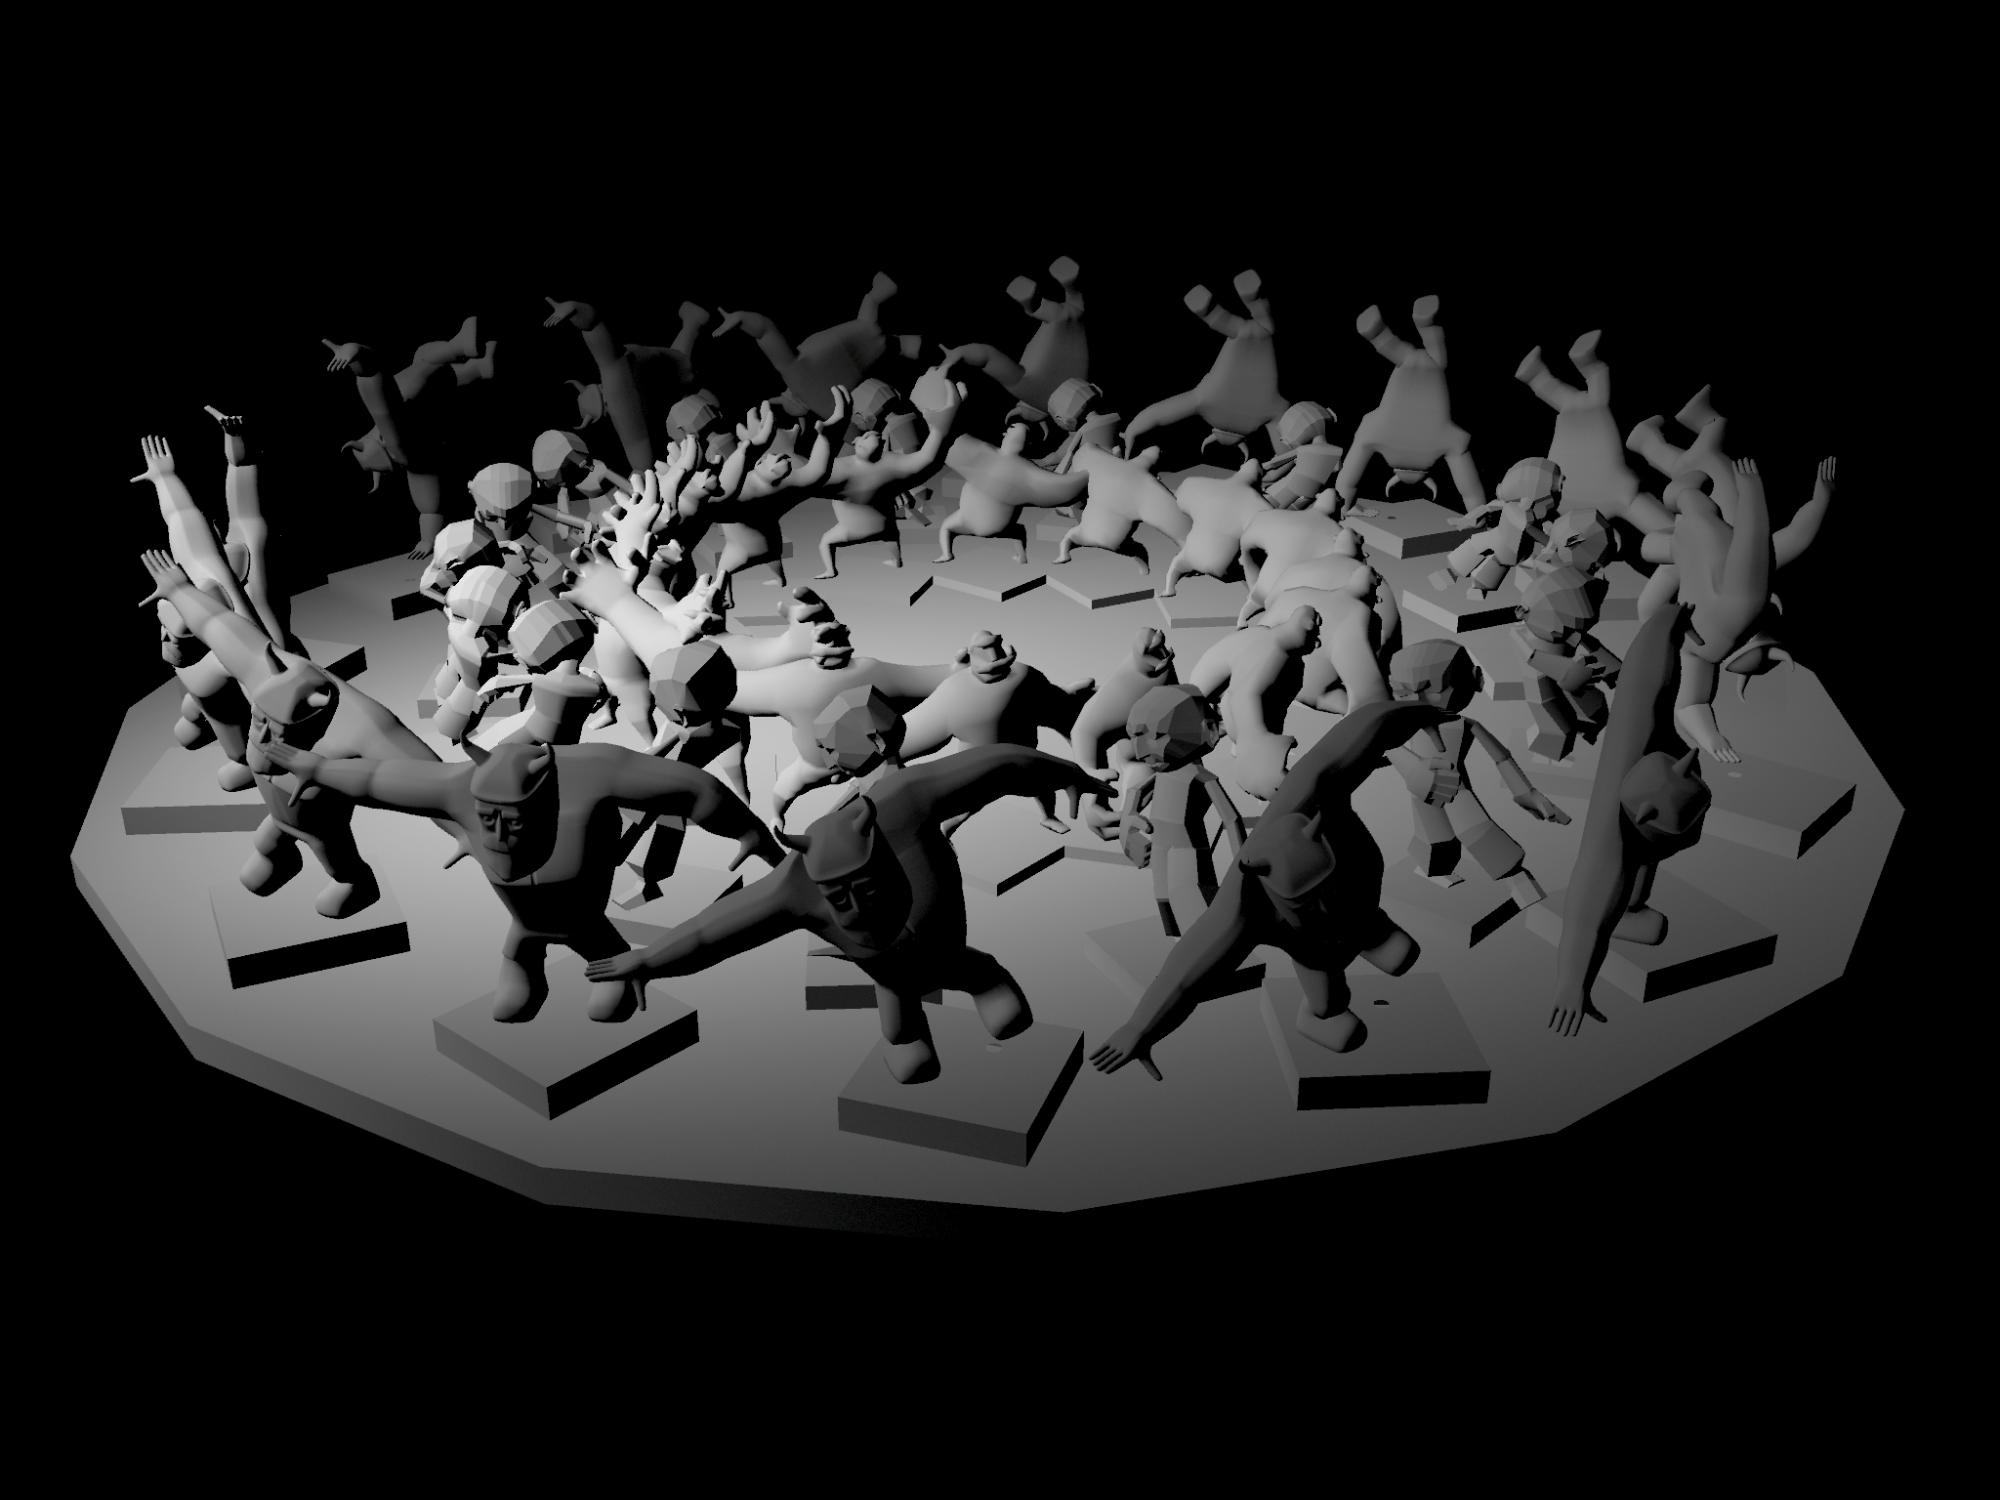 Screen capture of virtual zoetrope with additional character animations from Joe Derrick and Sam Elphick